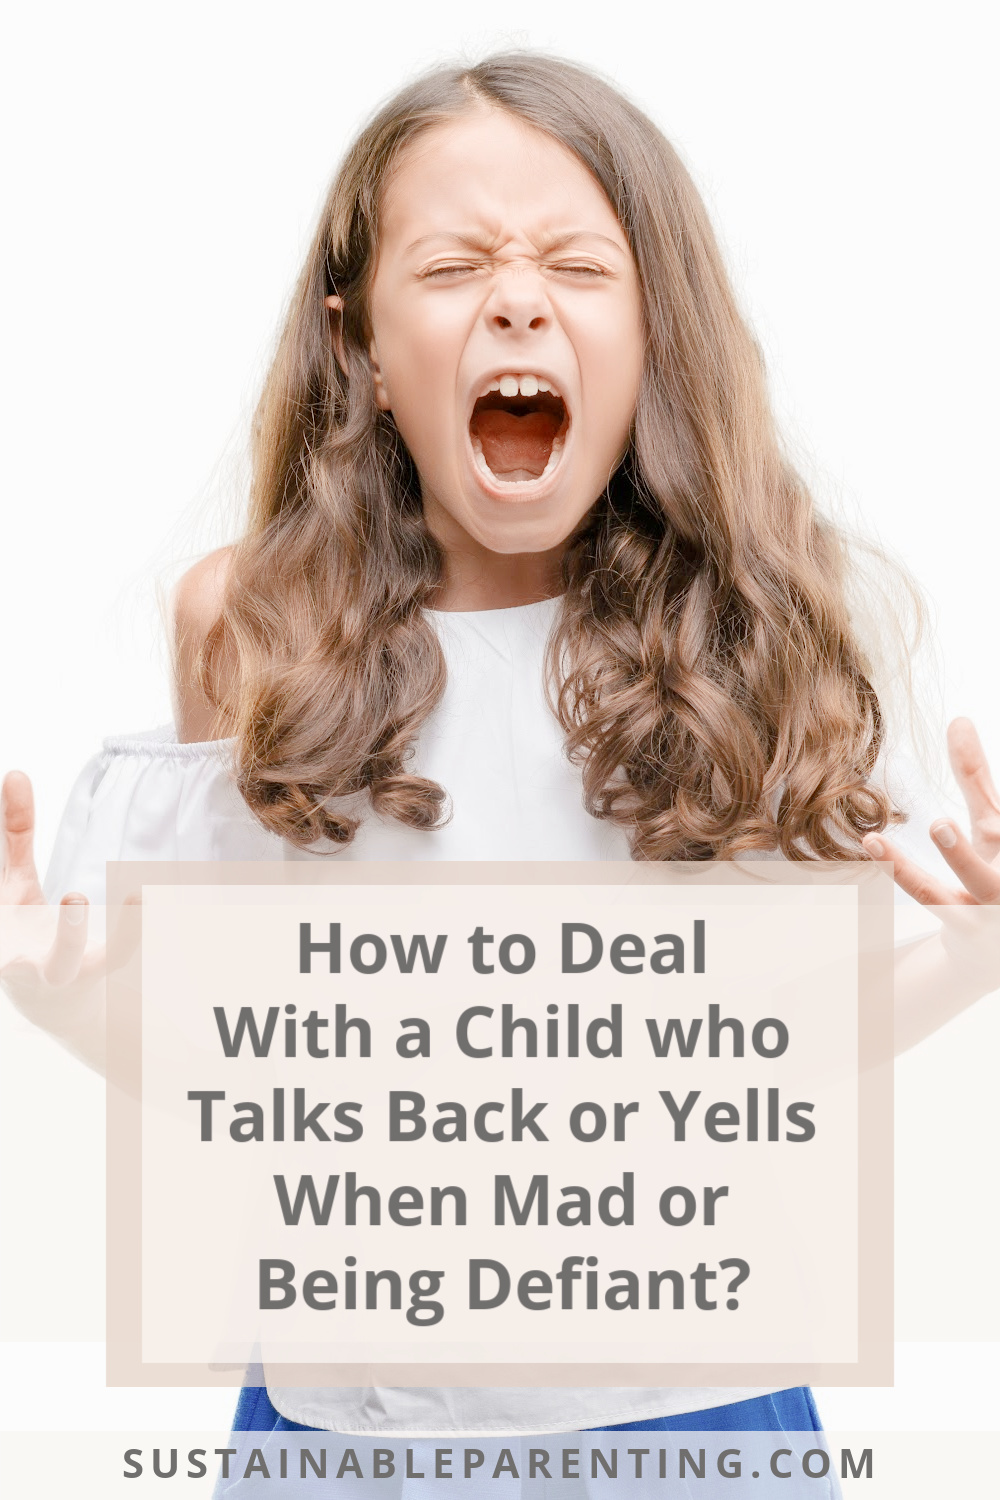 How To Deal With A Child Who Talks Back Or Yells When Mad Or Being Defiant?